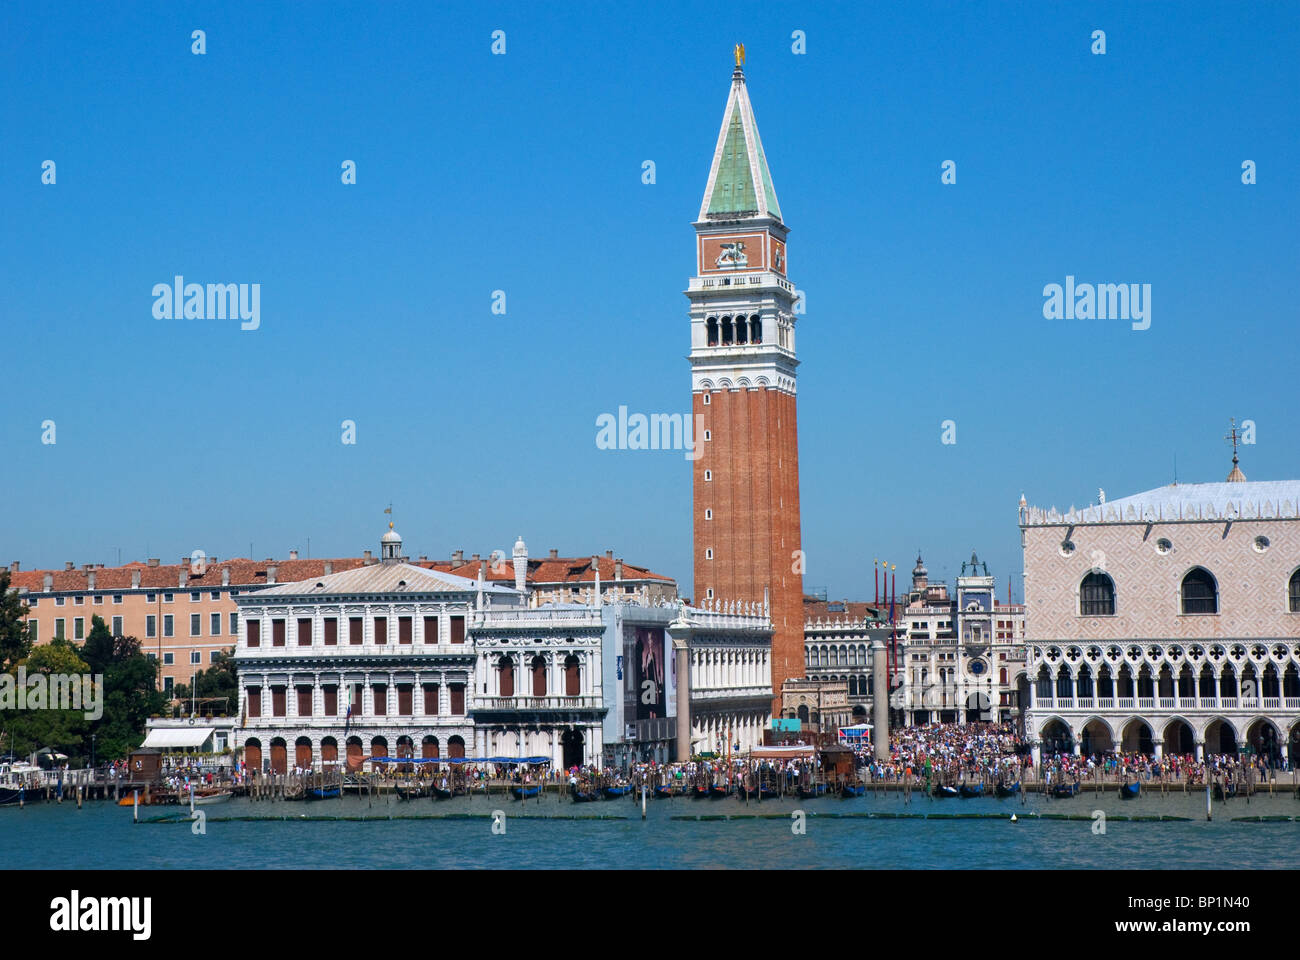 Campanile di San Marco or Bell Tower, St Marks, Venice Italy Stock Photo